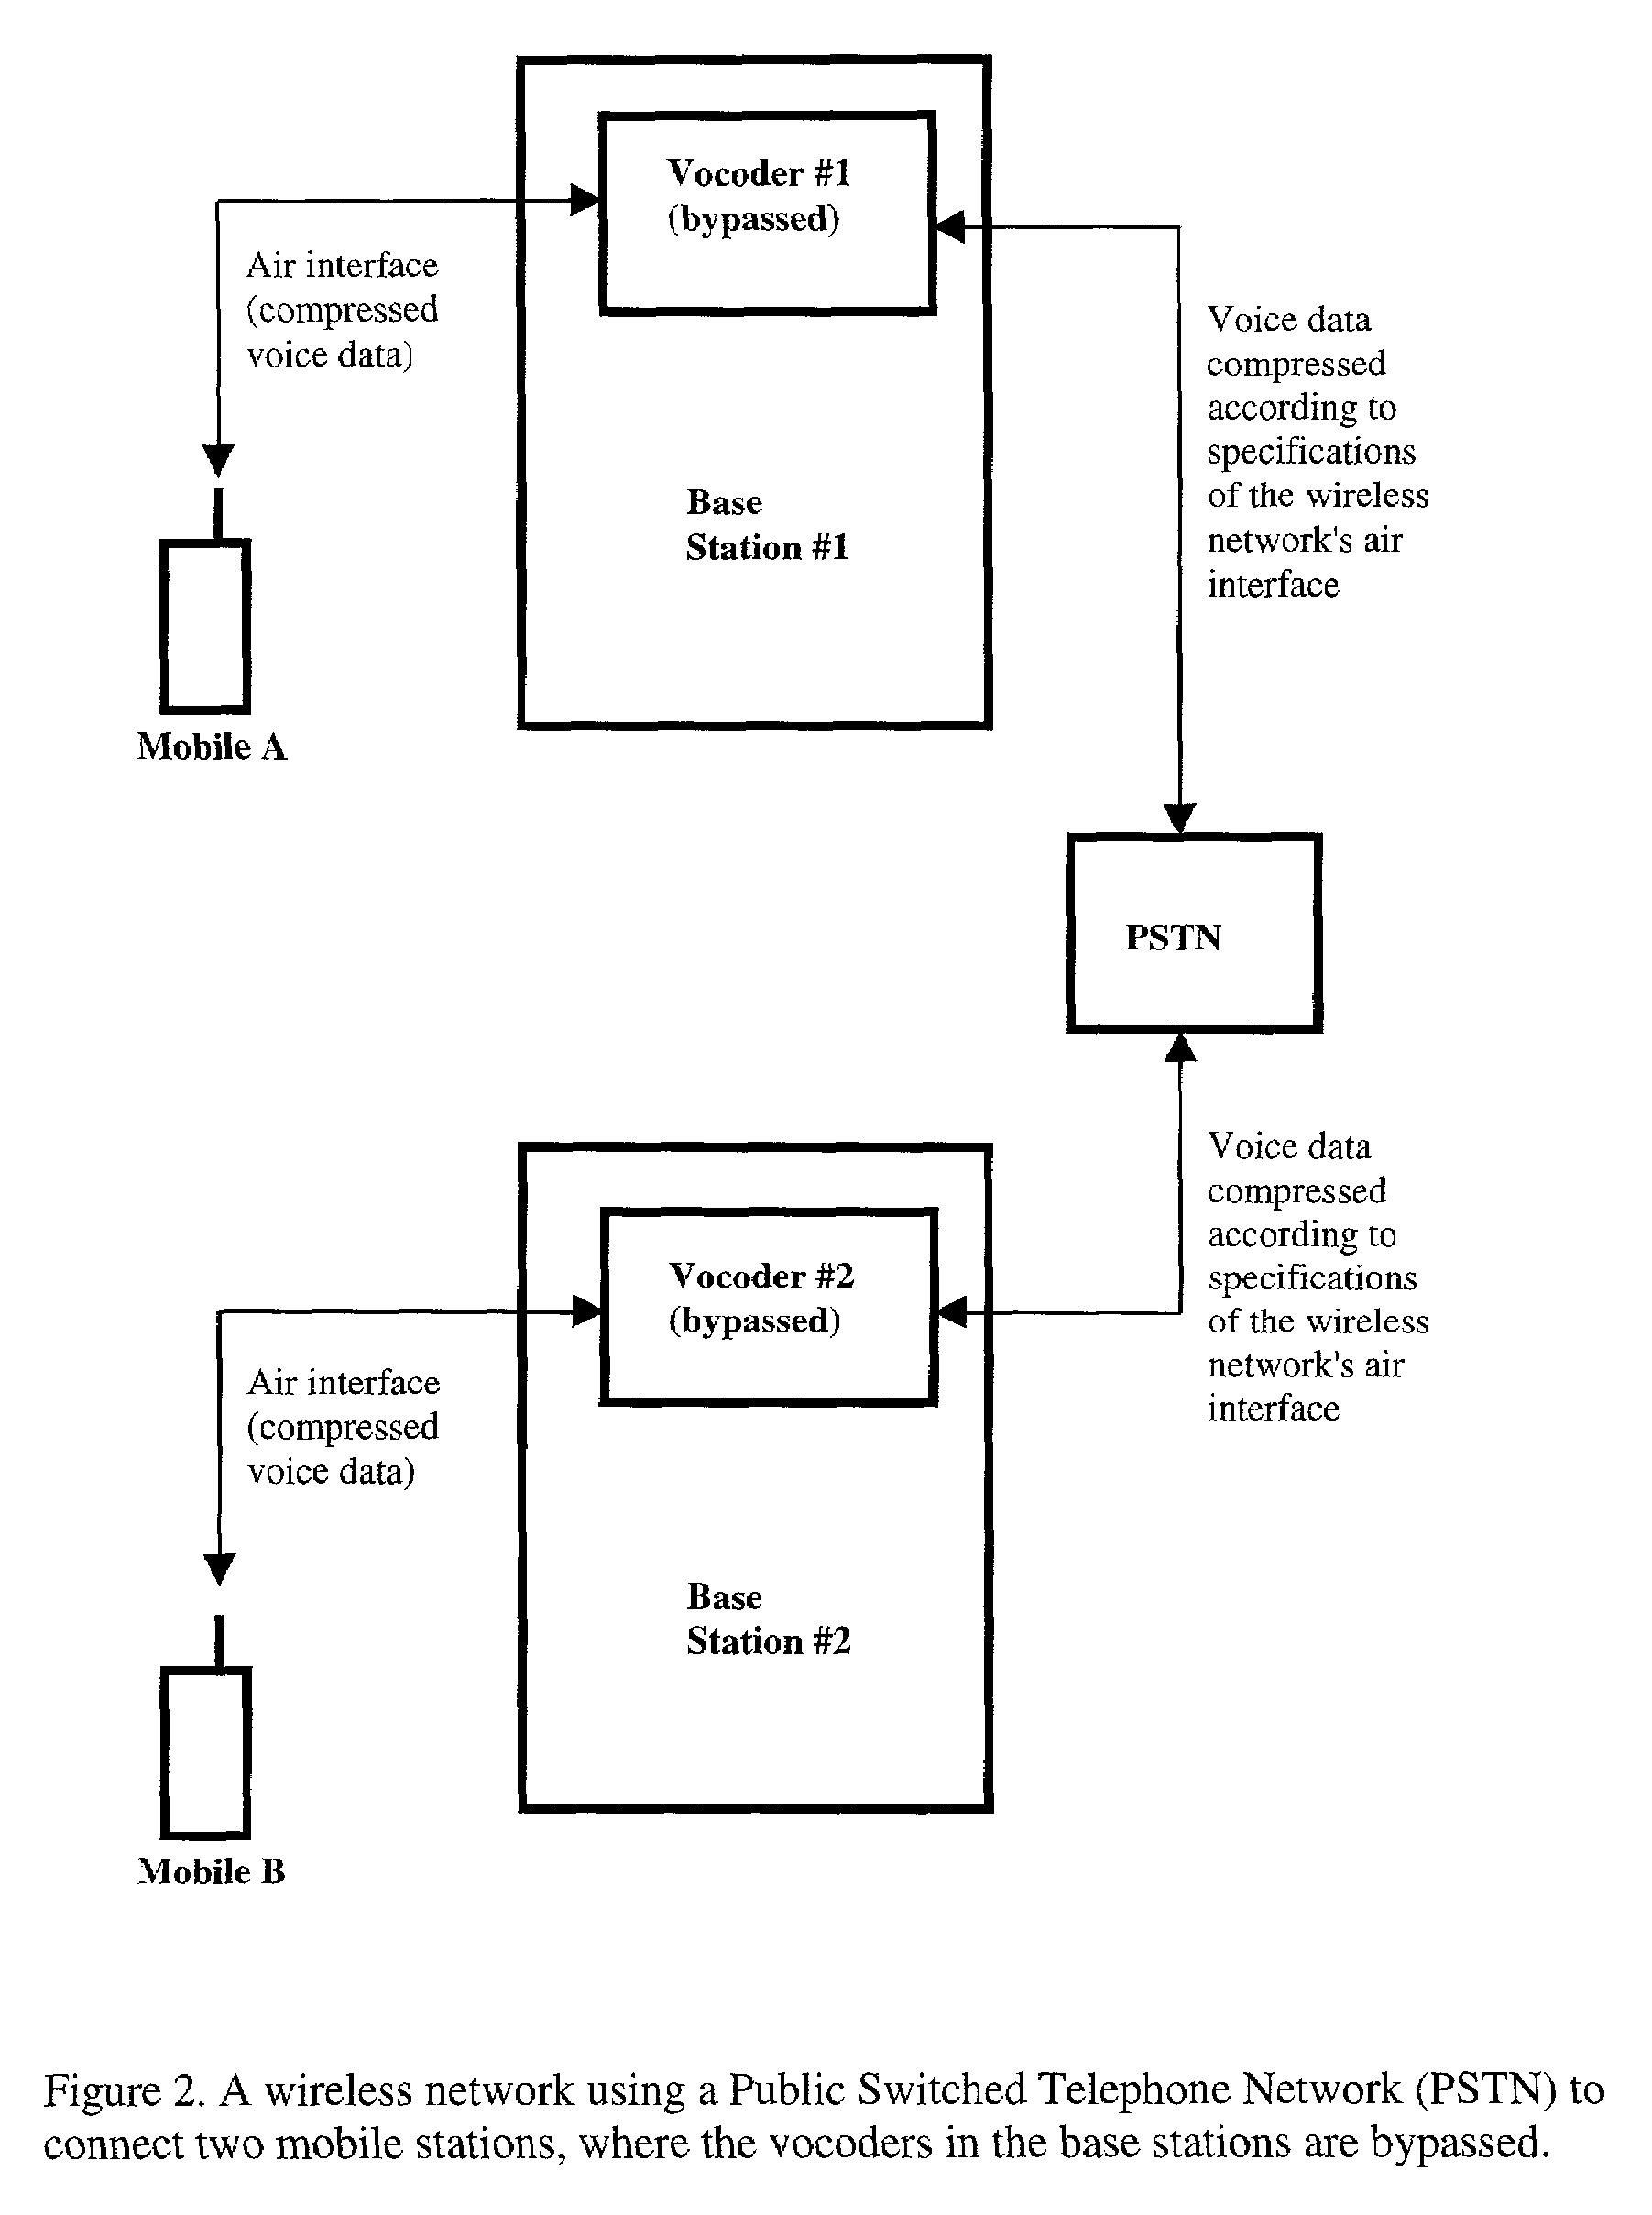 Method for reducing the number of vocoders in a wireless network